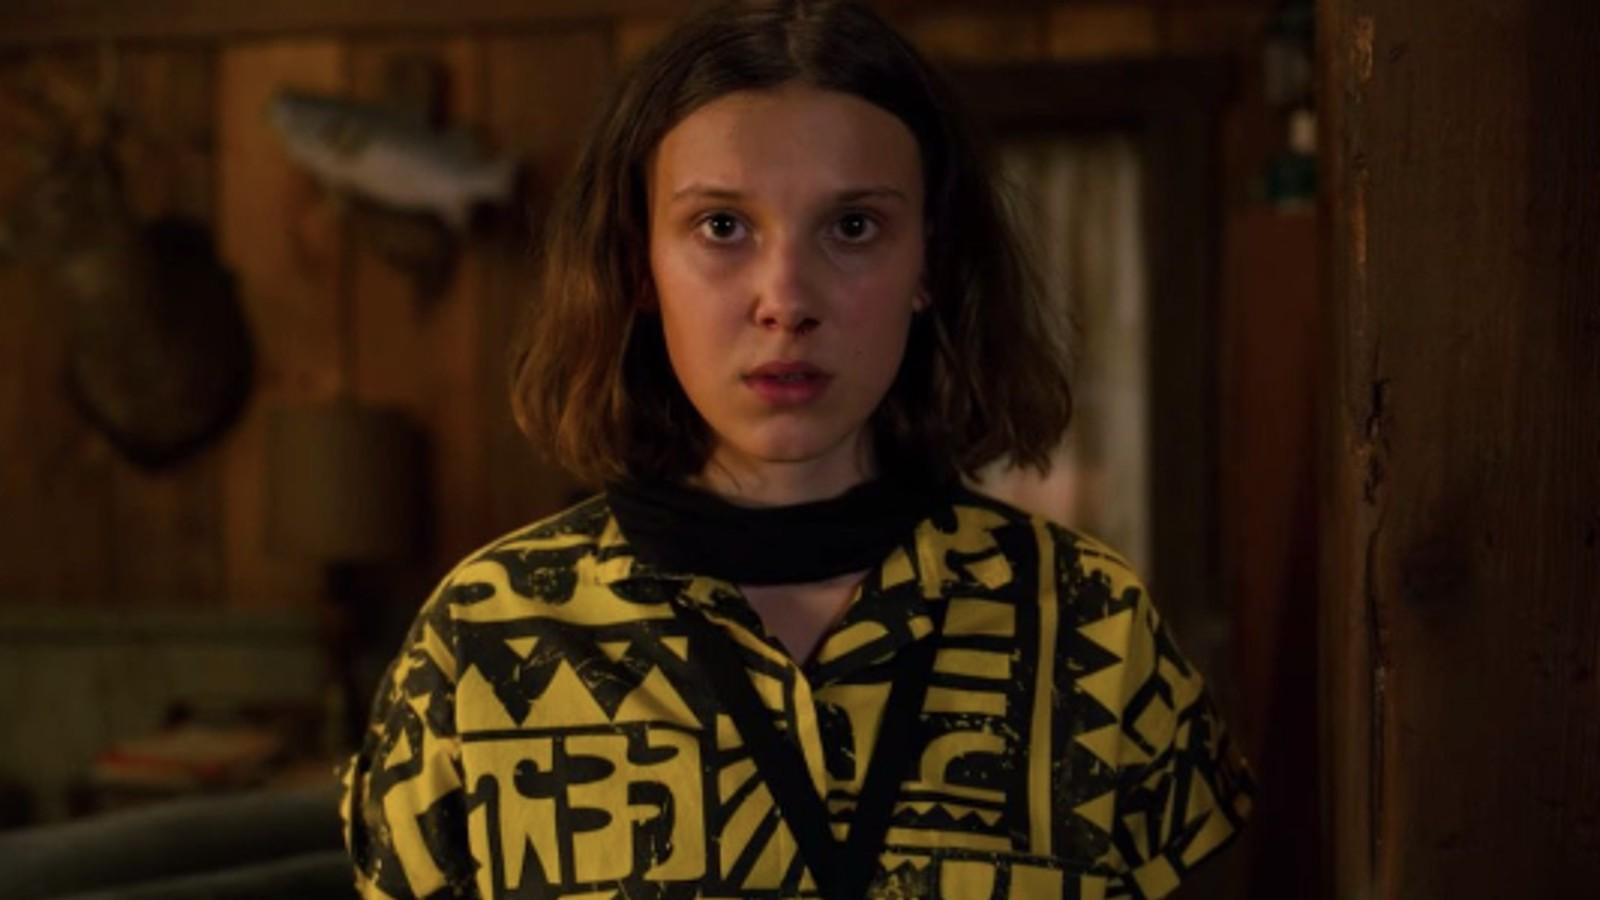 Millie Bobby Brown Ready to Leave 'Stranger Things' to 'Live Own Life